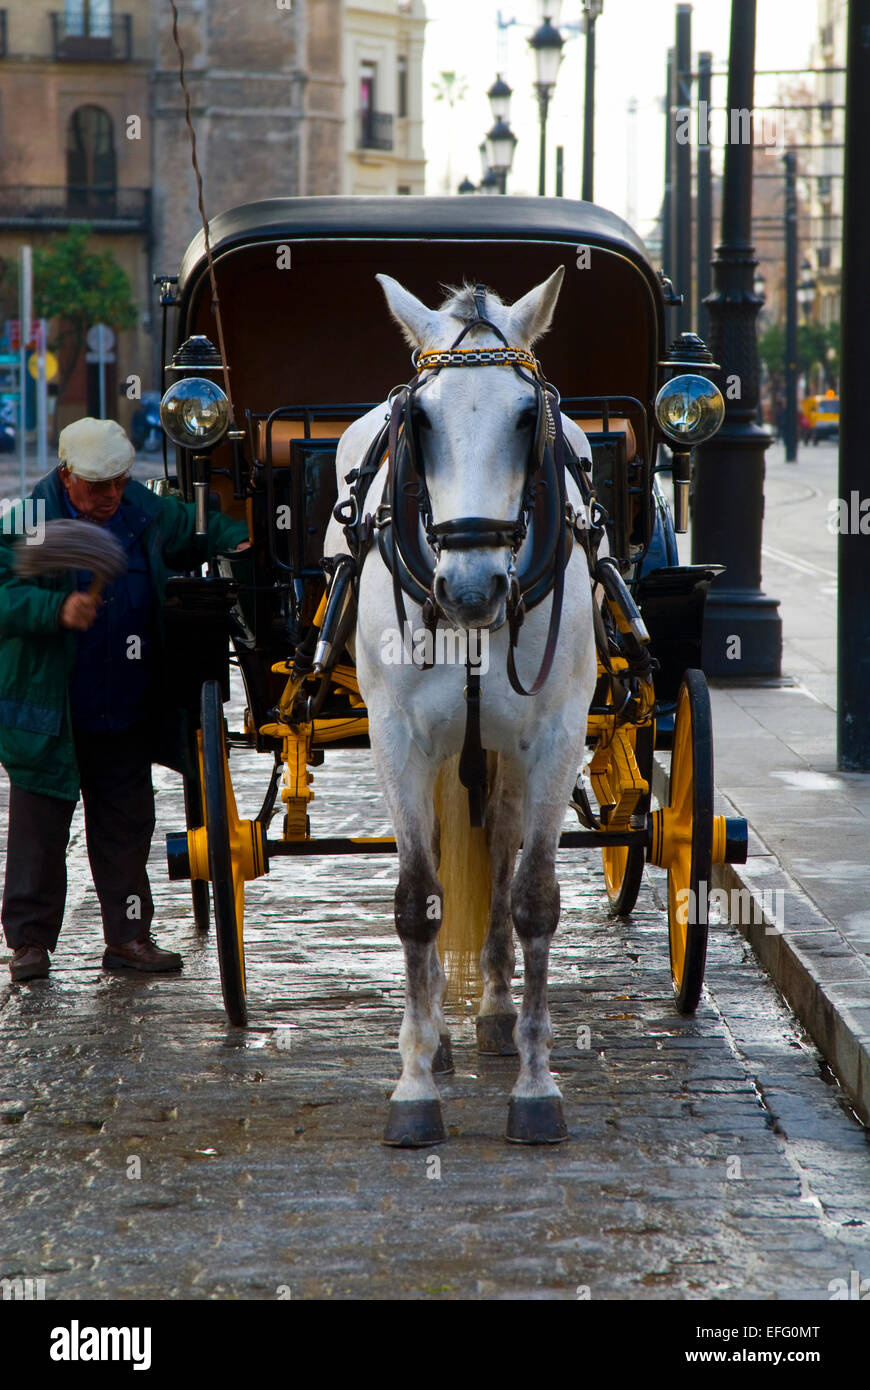 White horse and cart, Seville, Spain Stock Photo